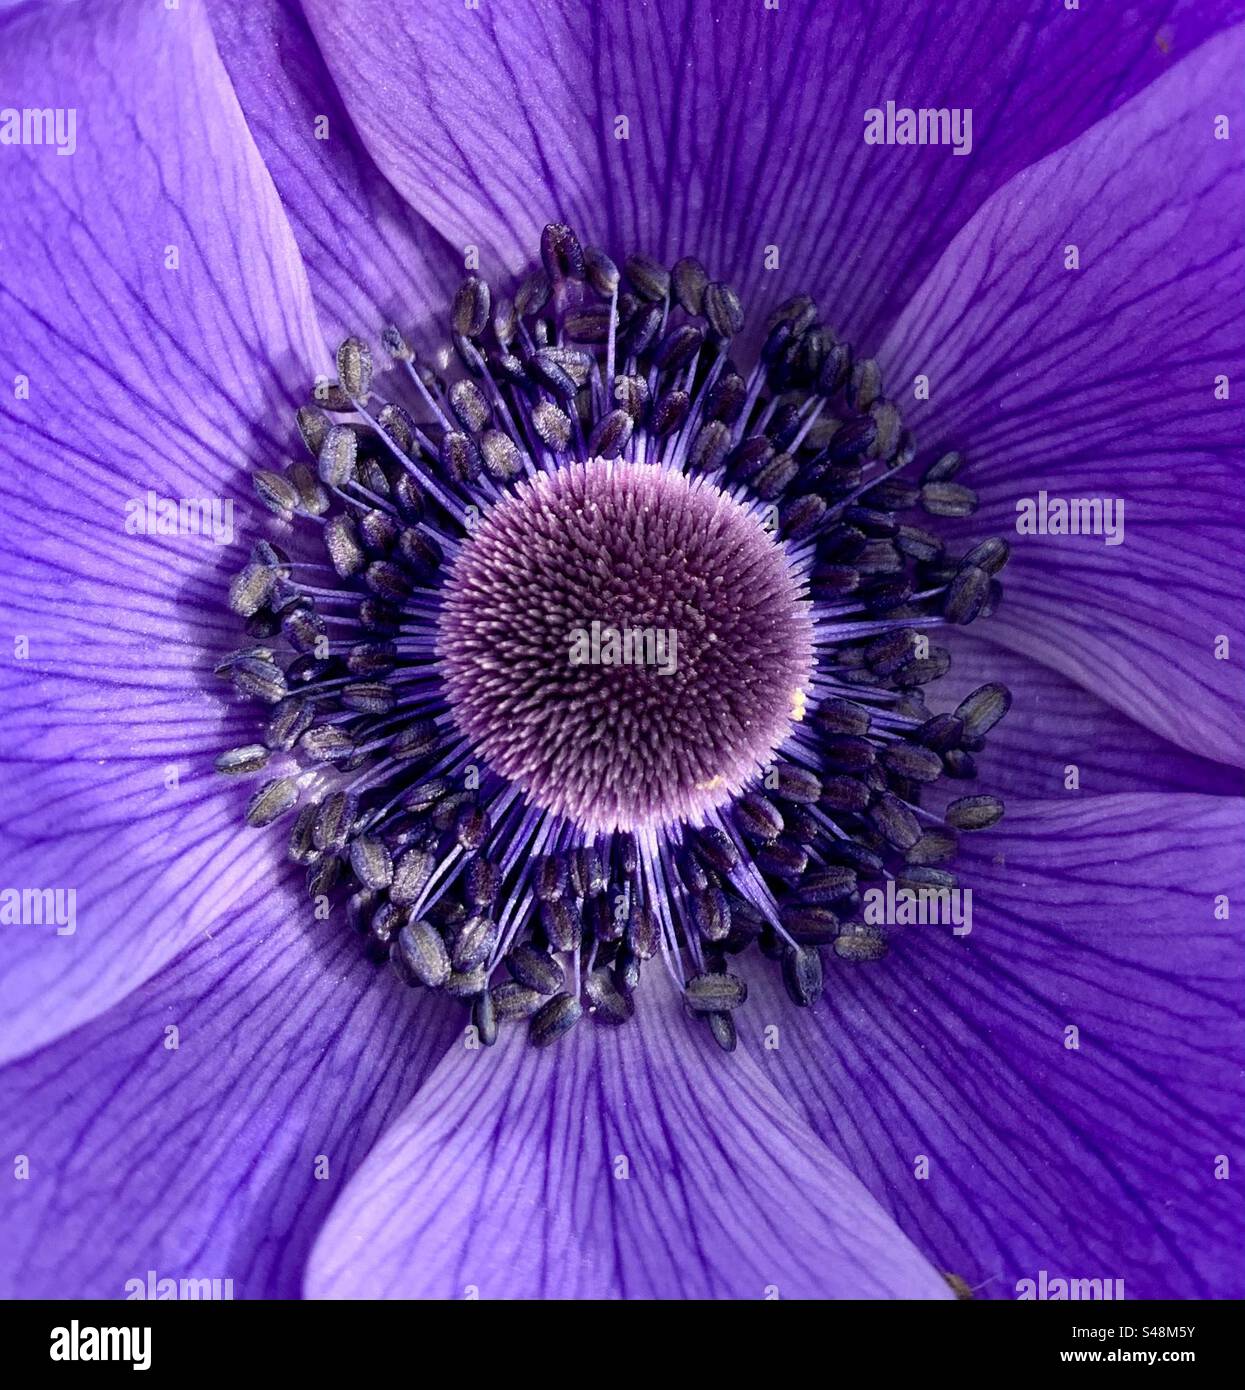 Centre of a purple anemone flower Stock Photo